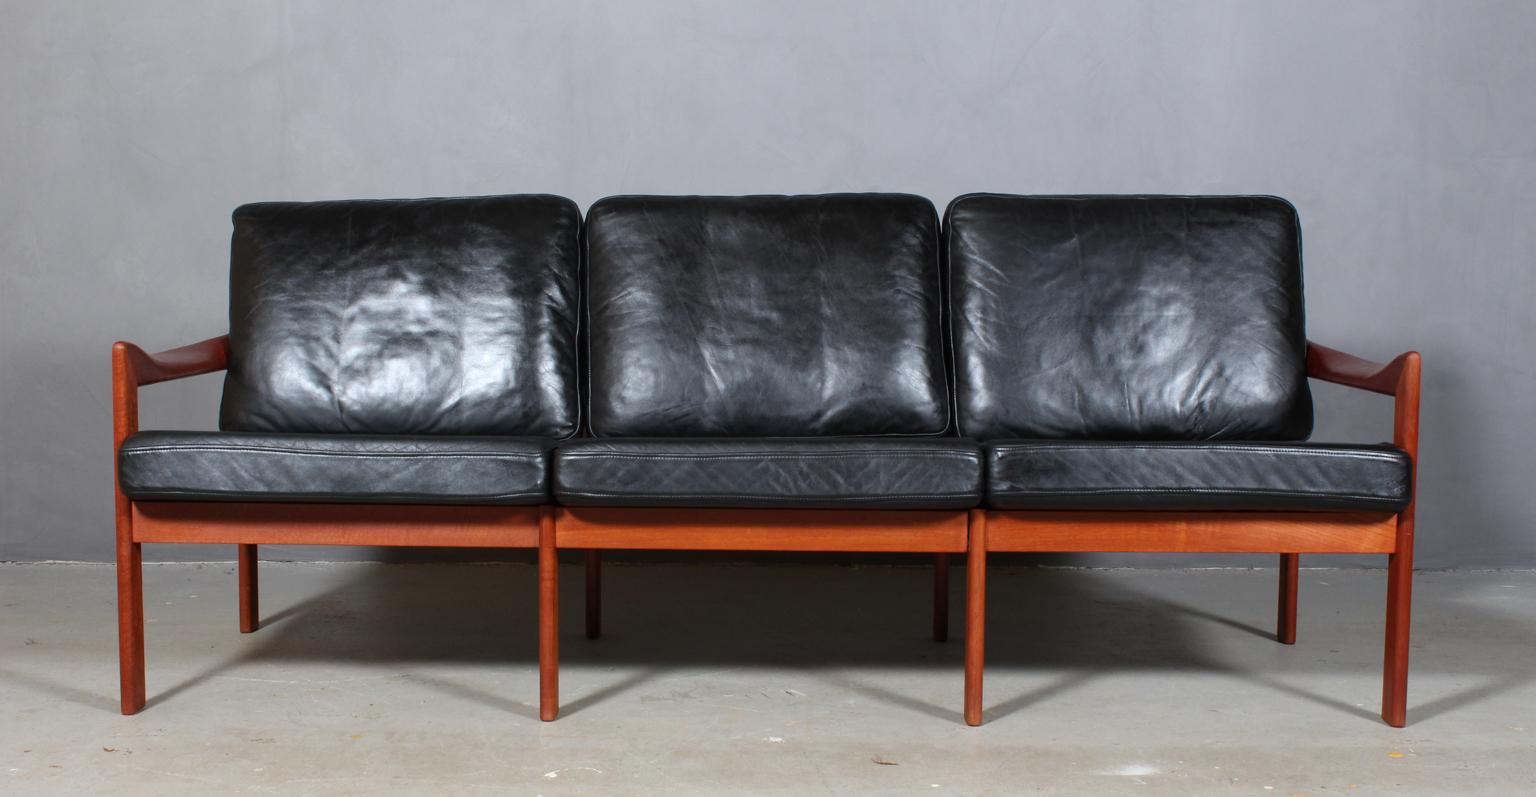 Leather Illum Wikkelsø Living Room Set, Three Seater Sofa and highback lounge chair